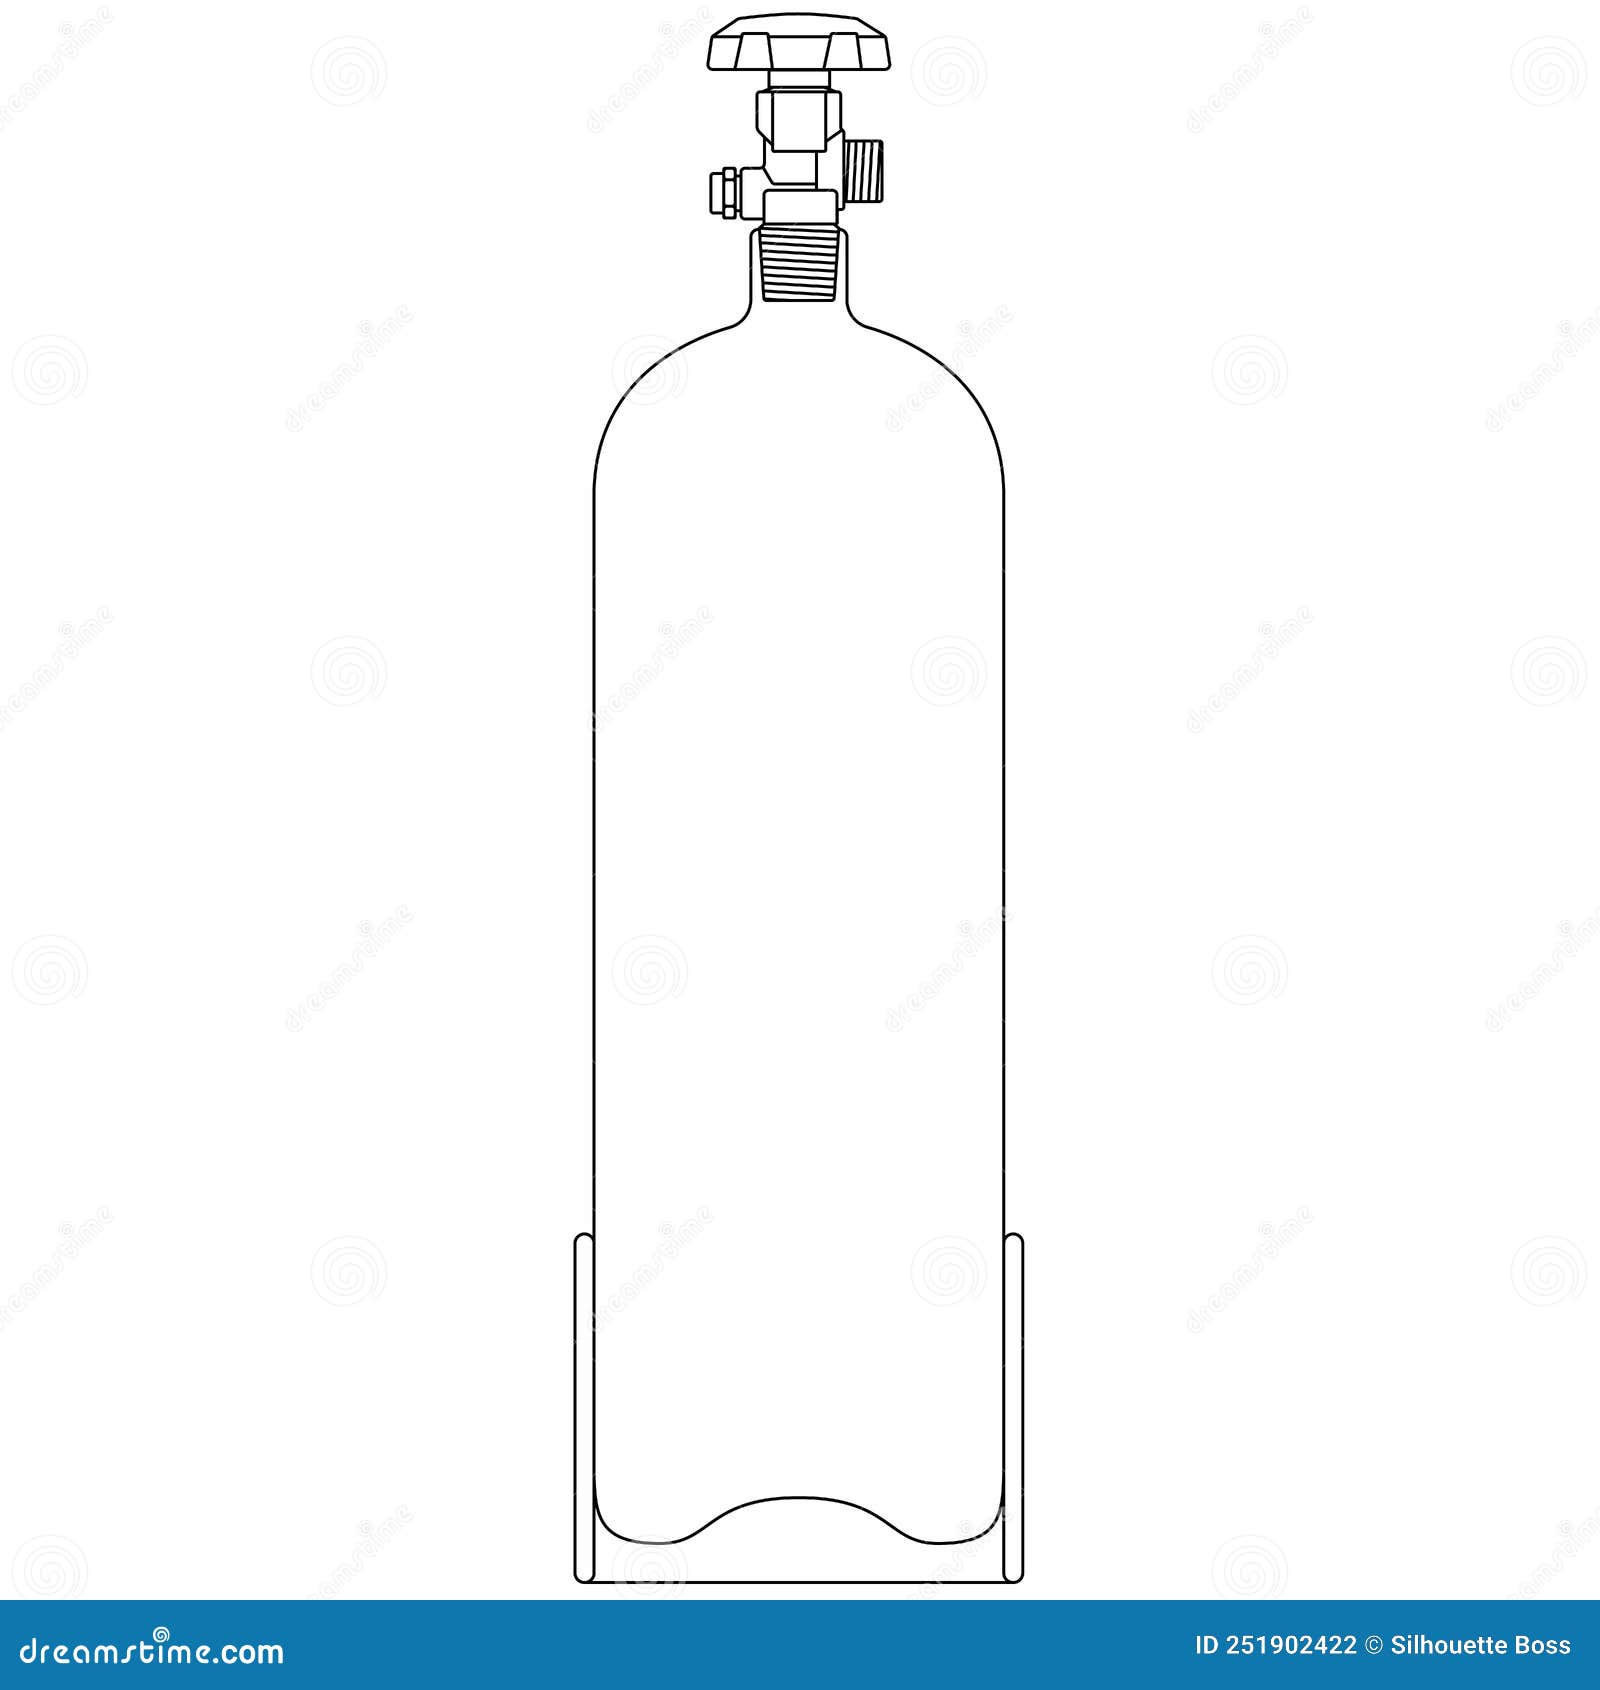 Gas cylinder Clip Art and Stock Illustrations 7832 Gas cylinder EPS  illustrations and vector clip art graphics available to search from  thousands of royalty free stock art creators